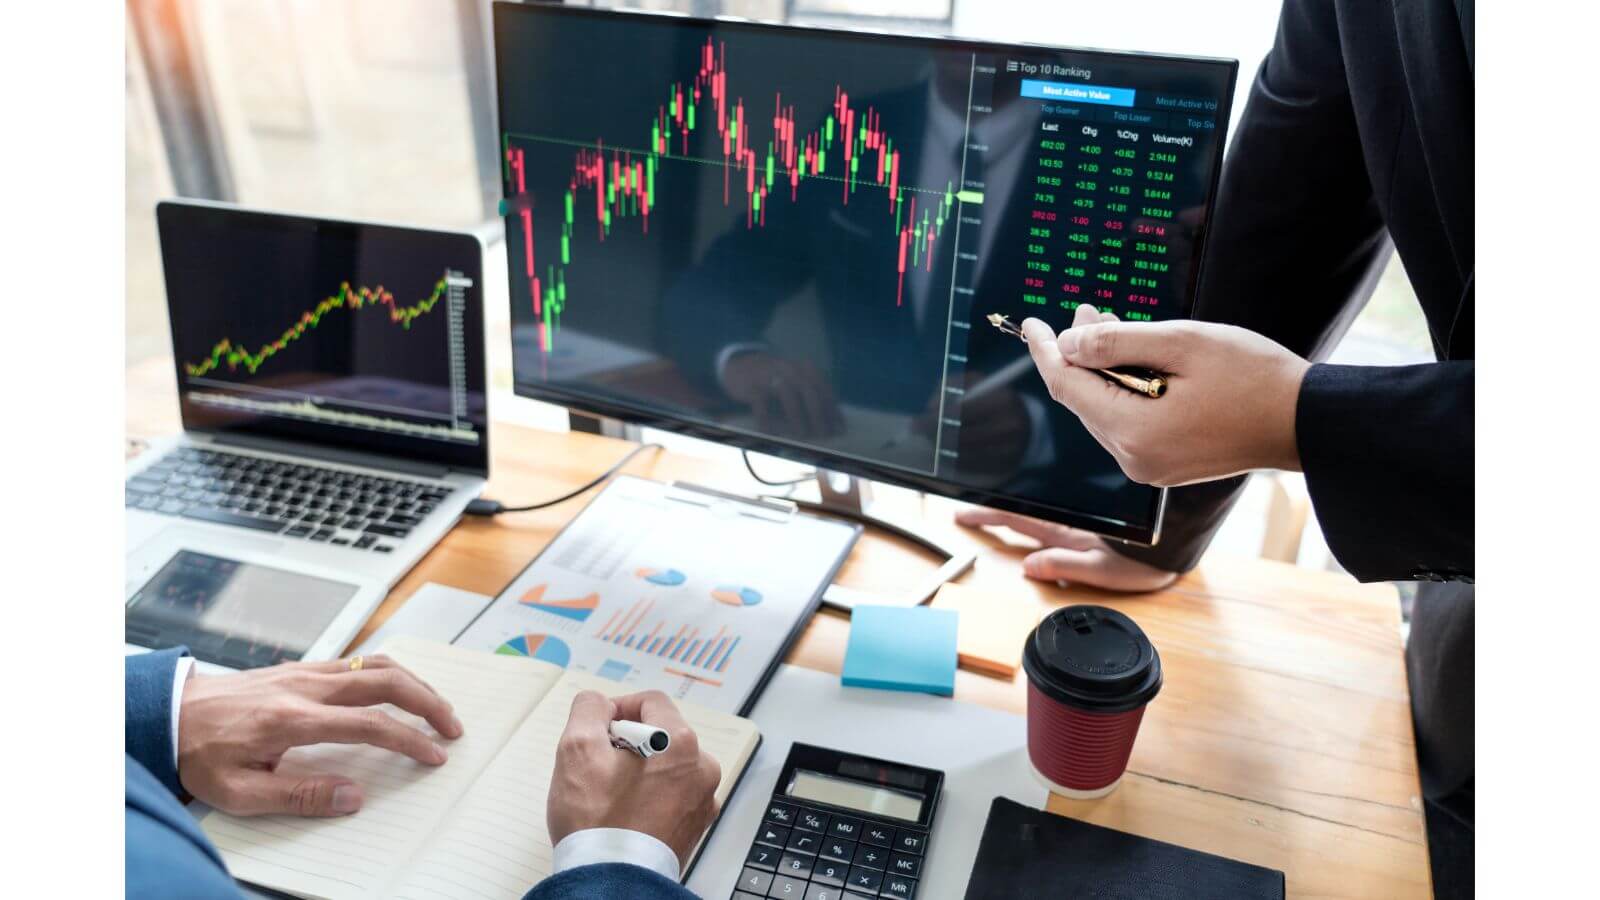 Professional Stock Trading Analysis Course